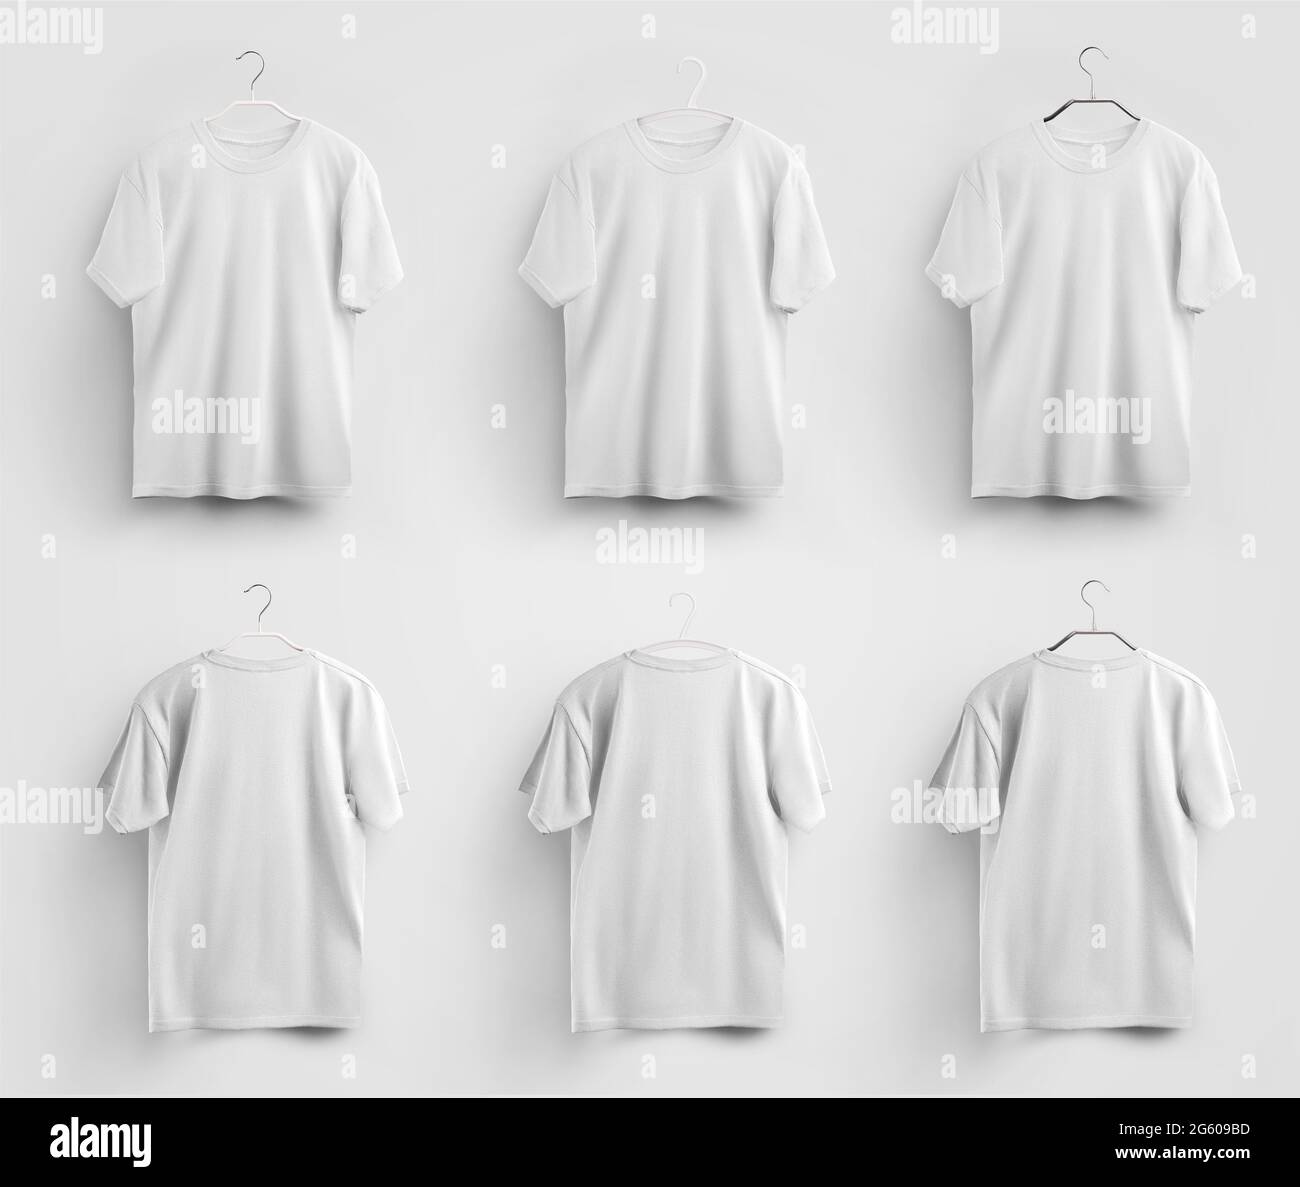 Mockup of men's white T-shirts on metal, plastic hangers, for design presentation, advertising in an online store. Clothing textile template isolated Stock Photo